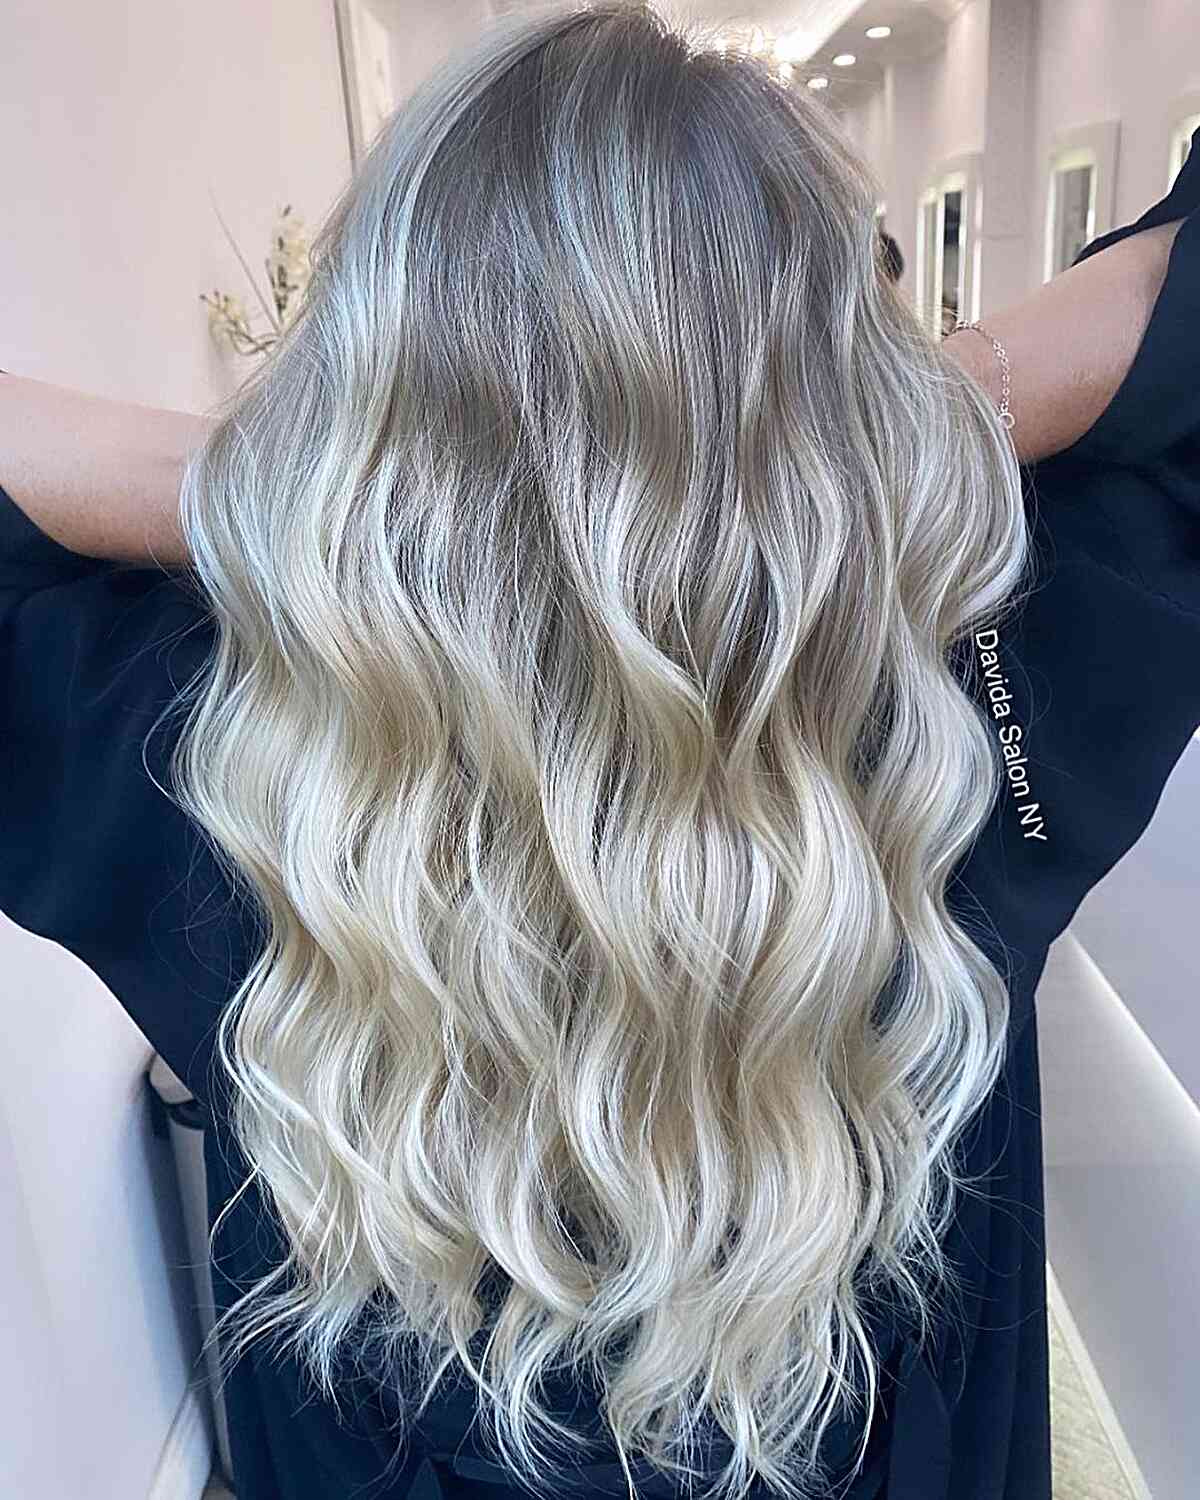 Glossy Ice Blonde Balayage with Shadow Root for Long Waves